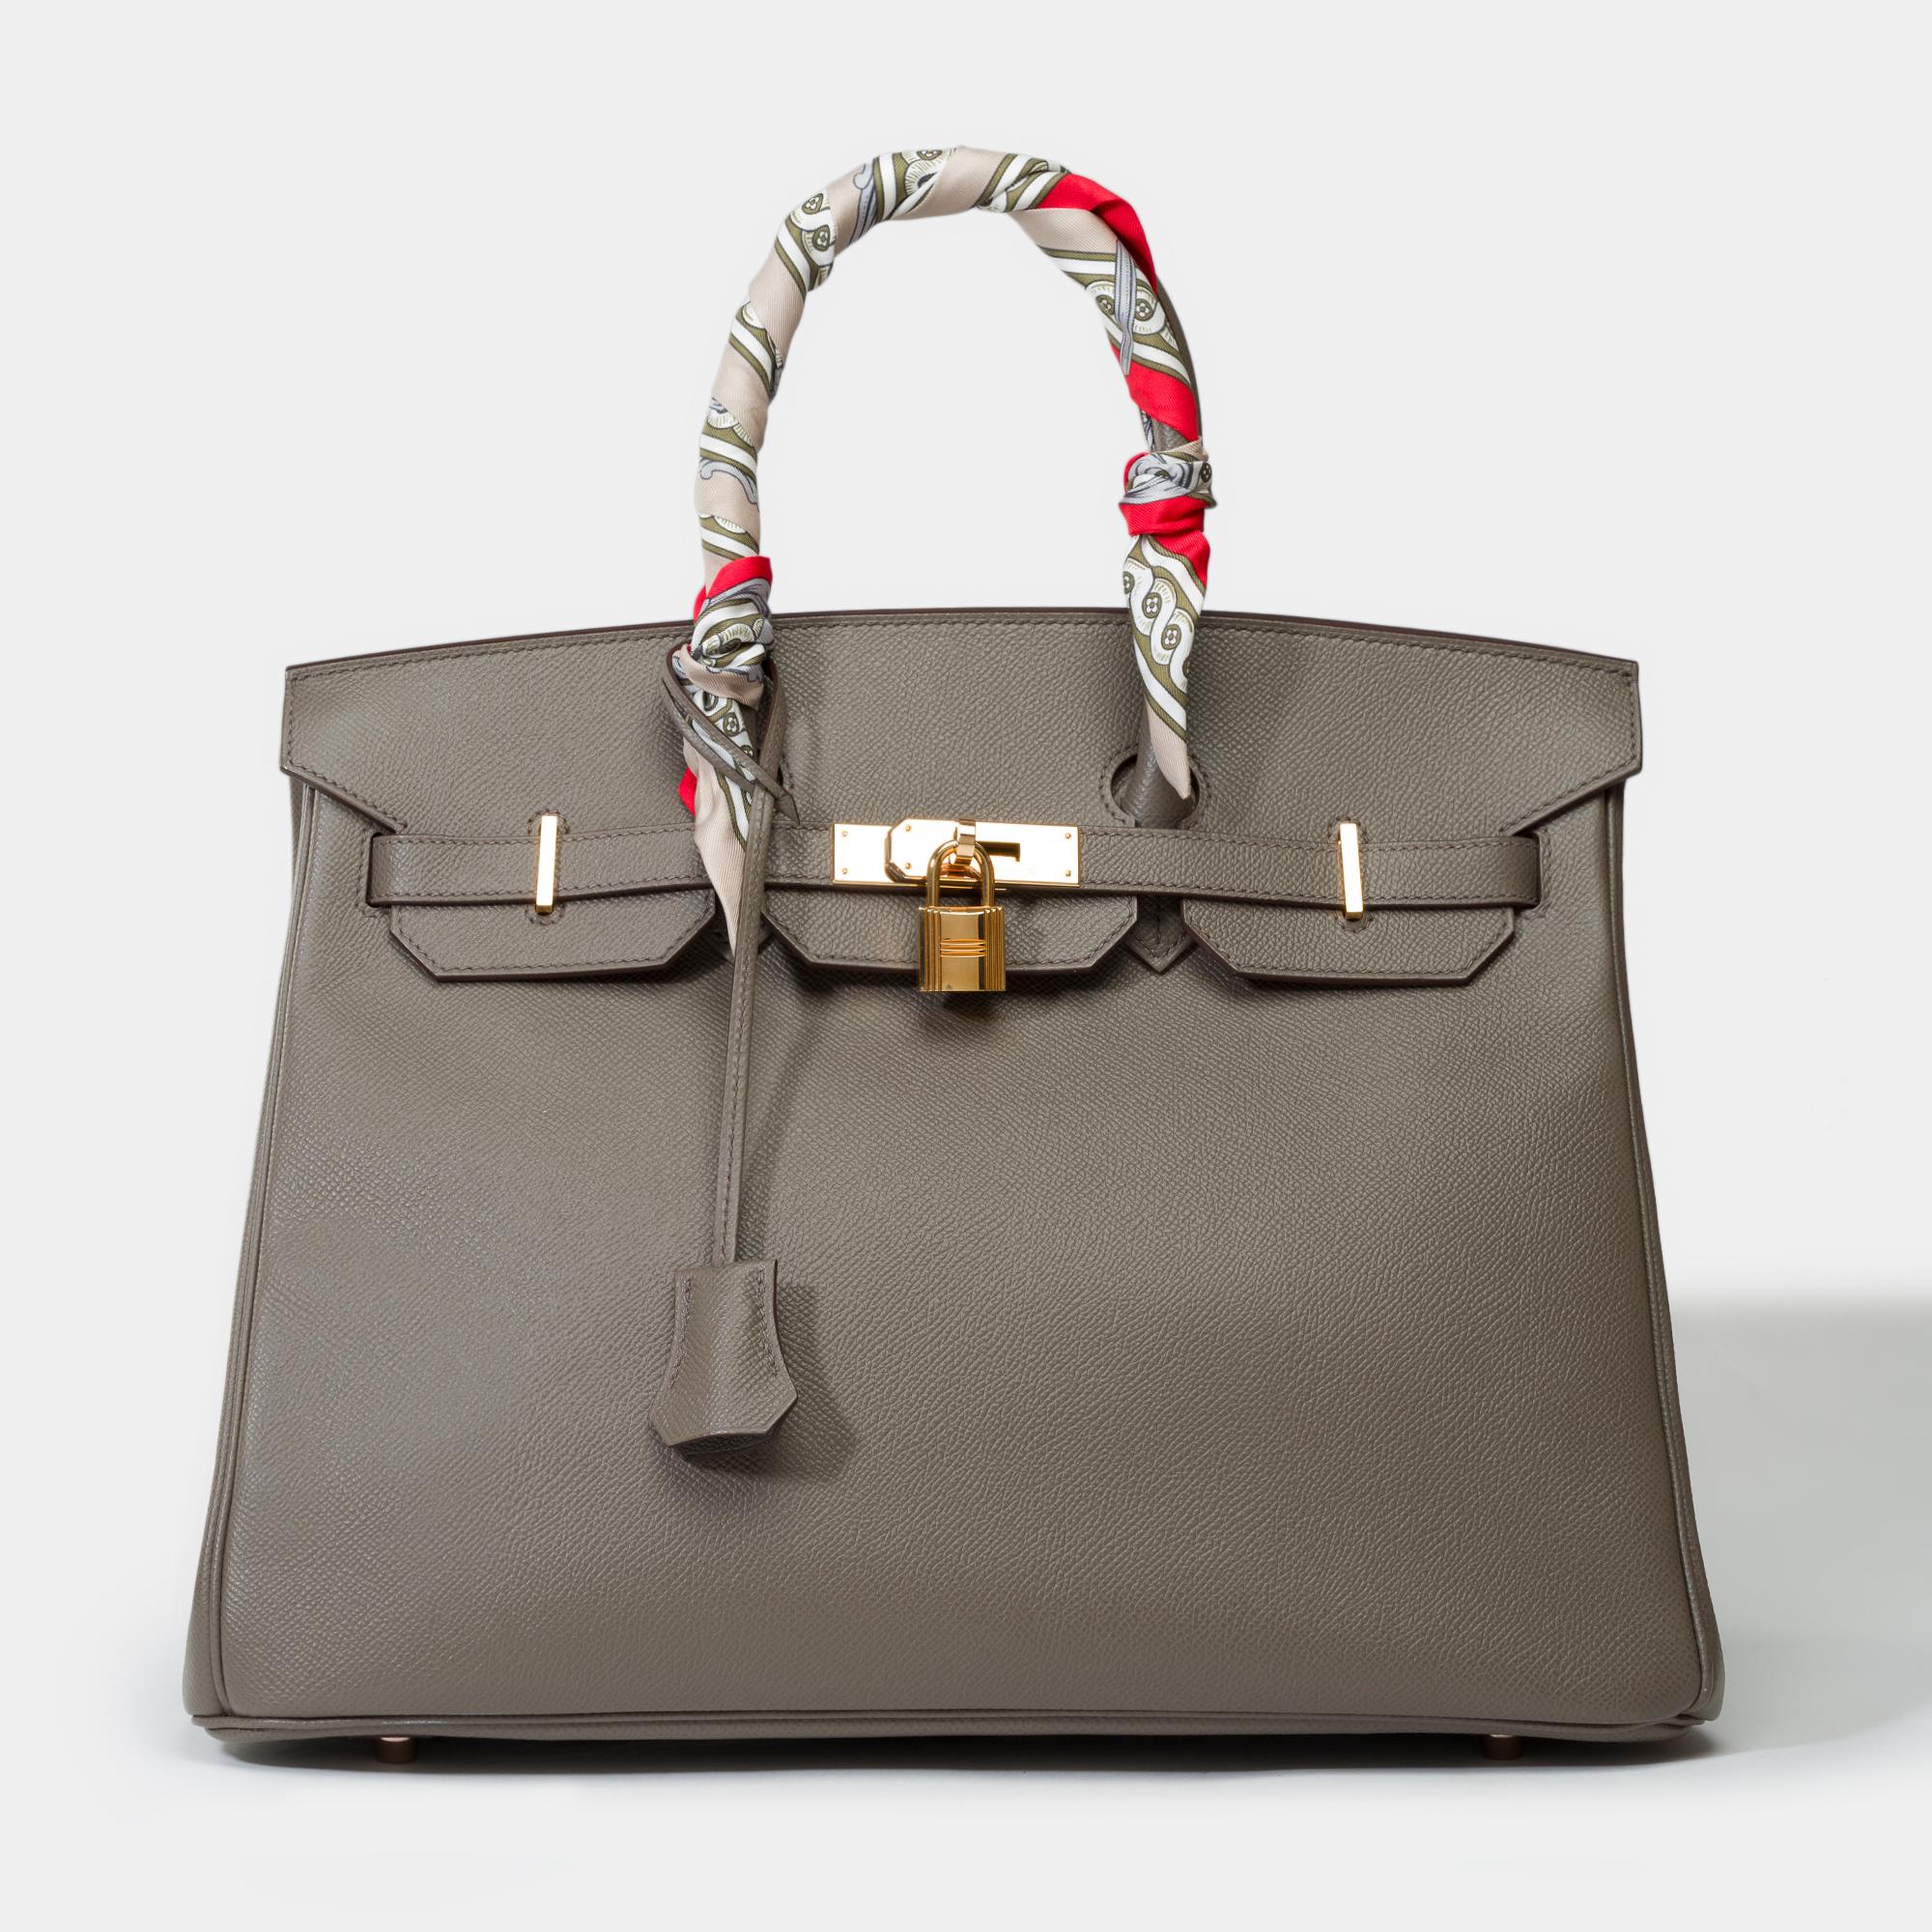 Rare​ ​Hermes​ ​Birkin​ ​35​ ​handbag​ ​in​ ​Etoupe​ ​Epsom​ ​leather,​ ​pink​ ​gold​ ​plated​ ​metal​ ​trim,​ ​double​ ​grey​ ​leather​ ​handle​ ​for​ ​hand​ ​carry

Flap​ ​closure
Grey​ ​leather​ ​interior​ ​lining,​ ​a​ ​zippered​ ​pocket,​ ​a​